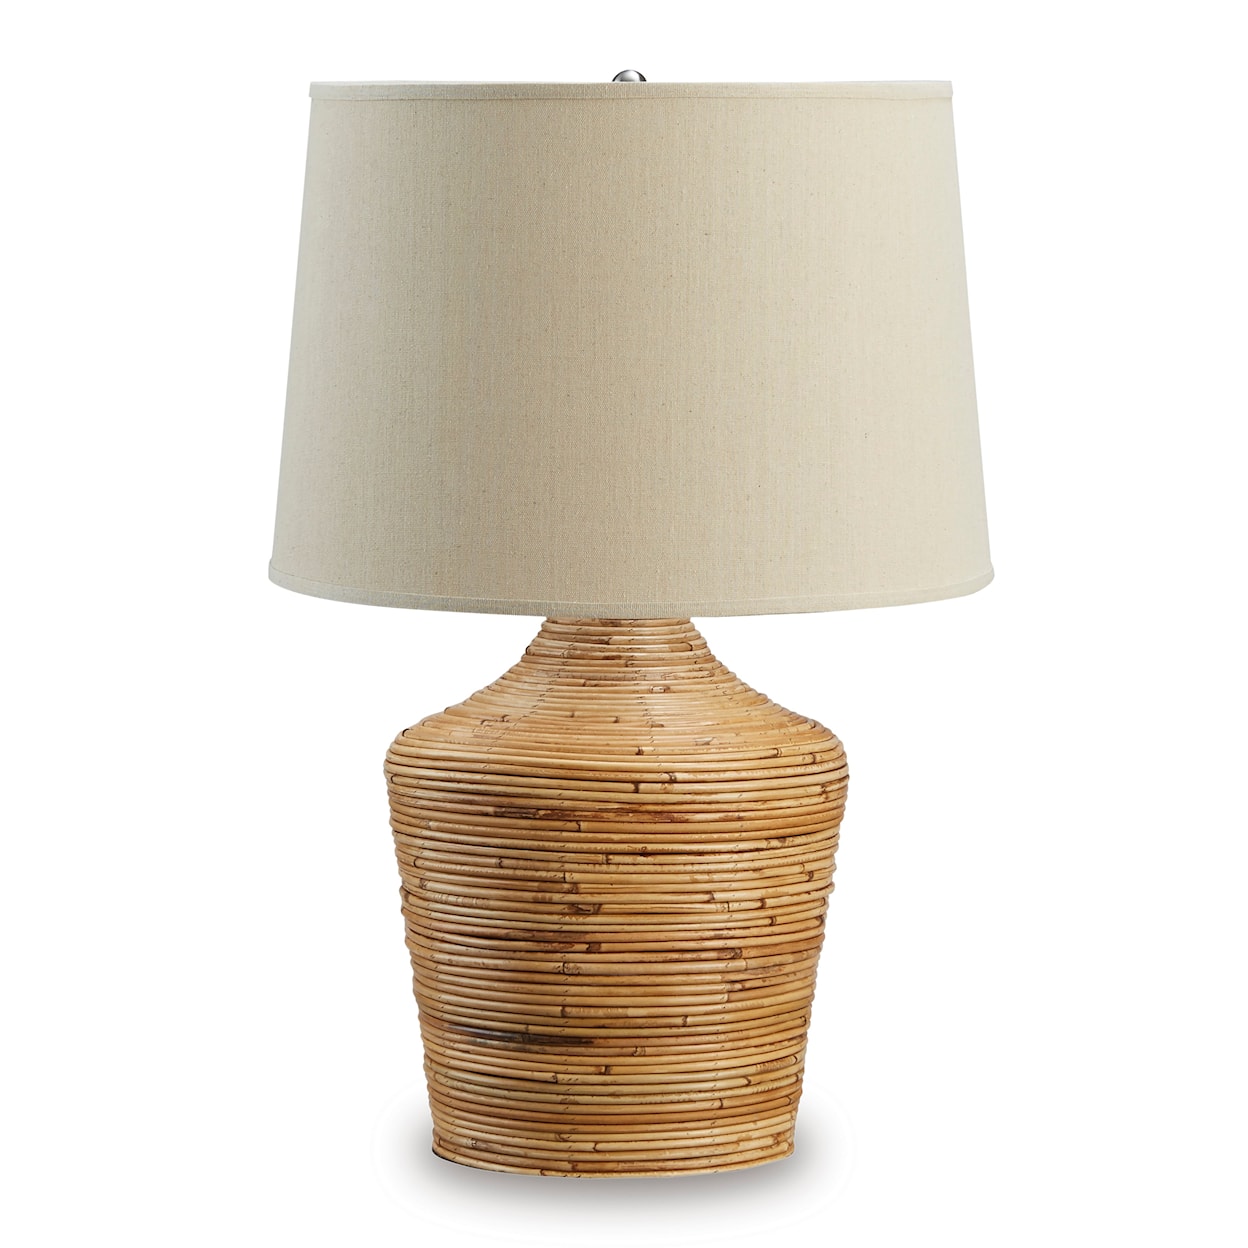 Benchcraft Lamps - Casual Kerrus Table Lamp